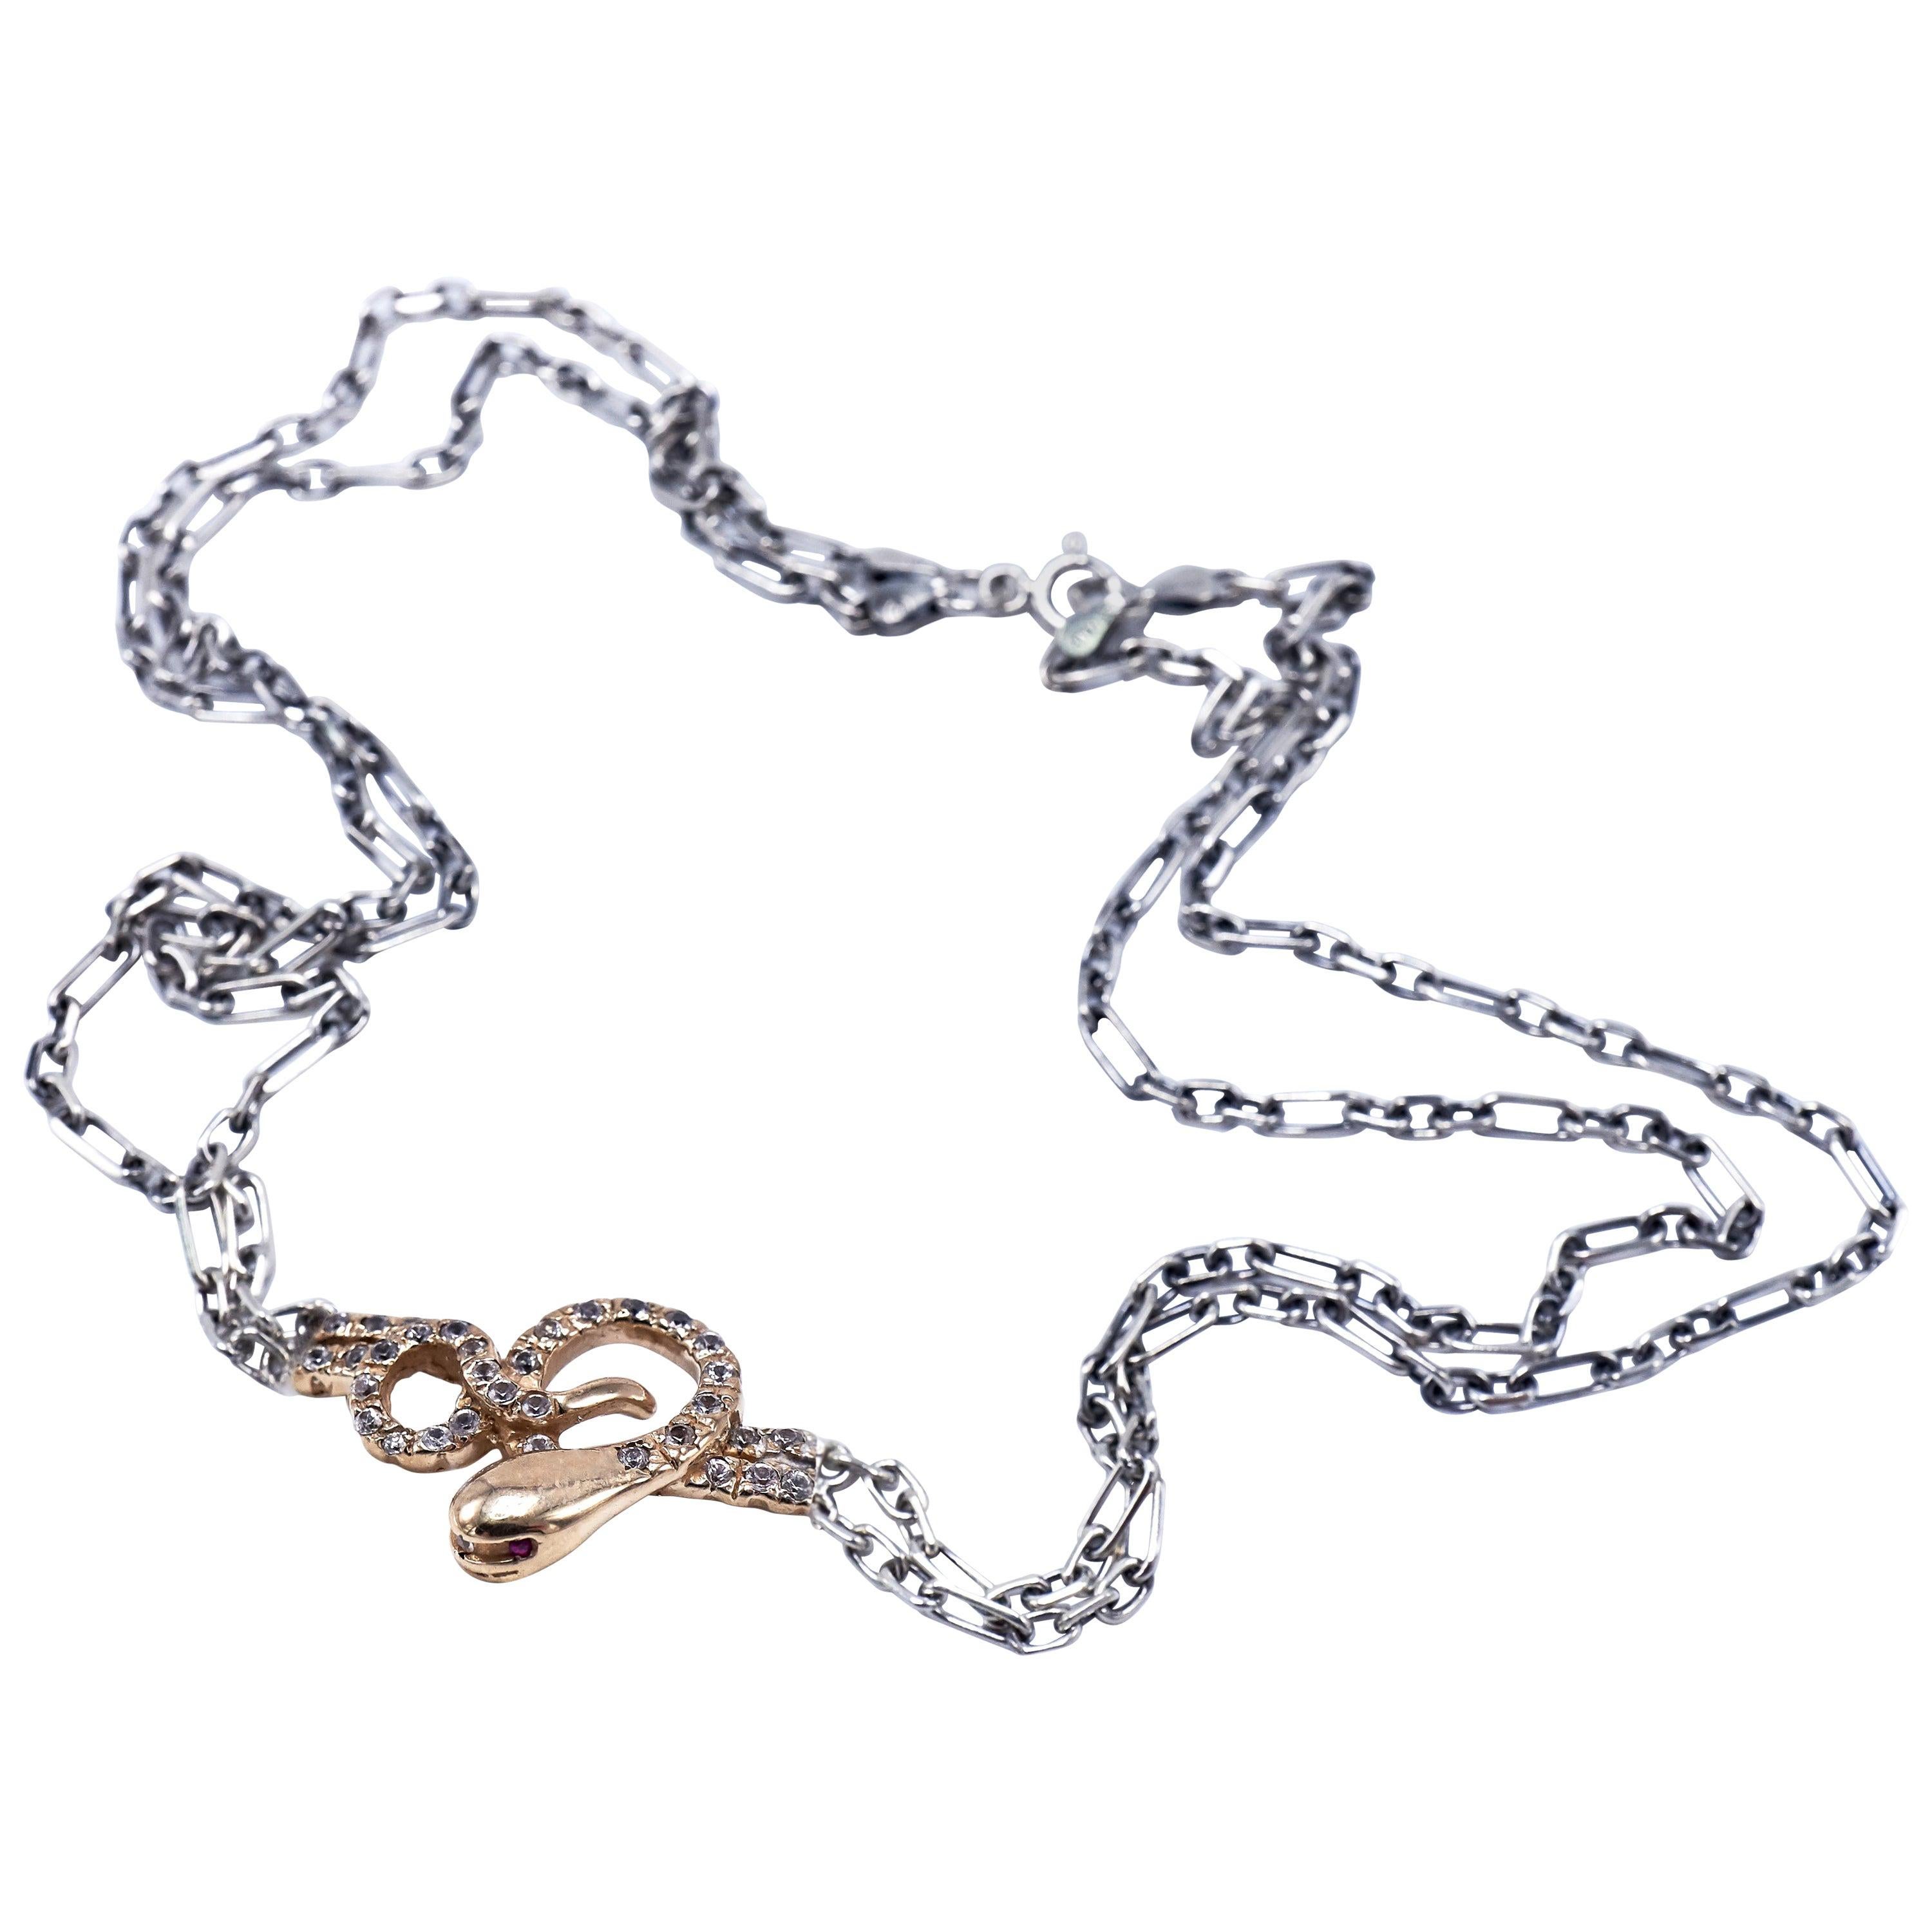 White Diamond Gold Snake Pendant Choker Chain Necklace in Silver with Ruby Eyes

Designer J DAUPHIN 
Product: 